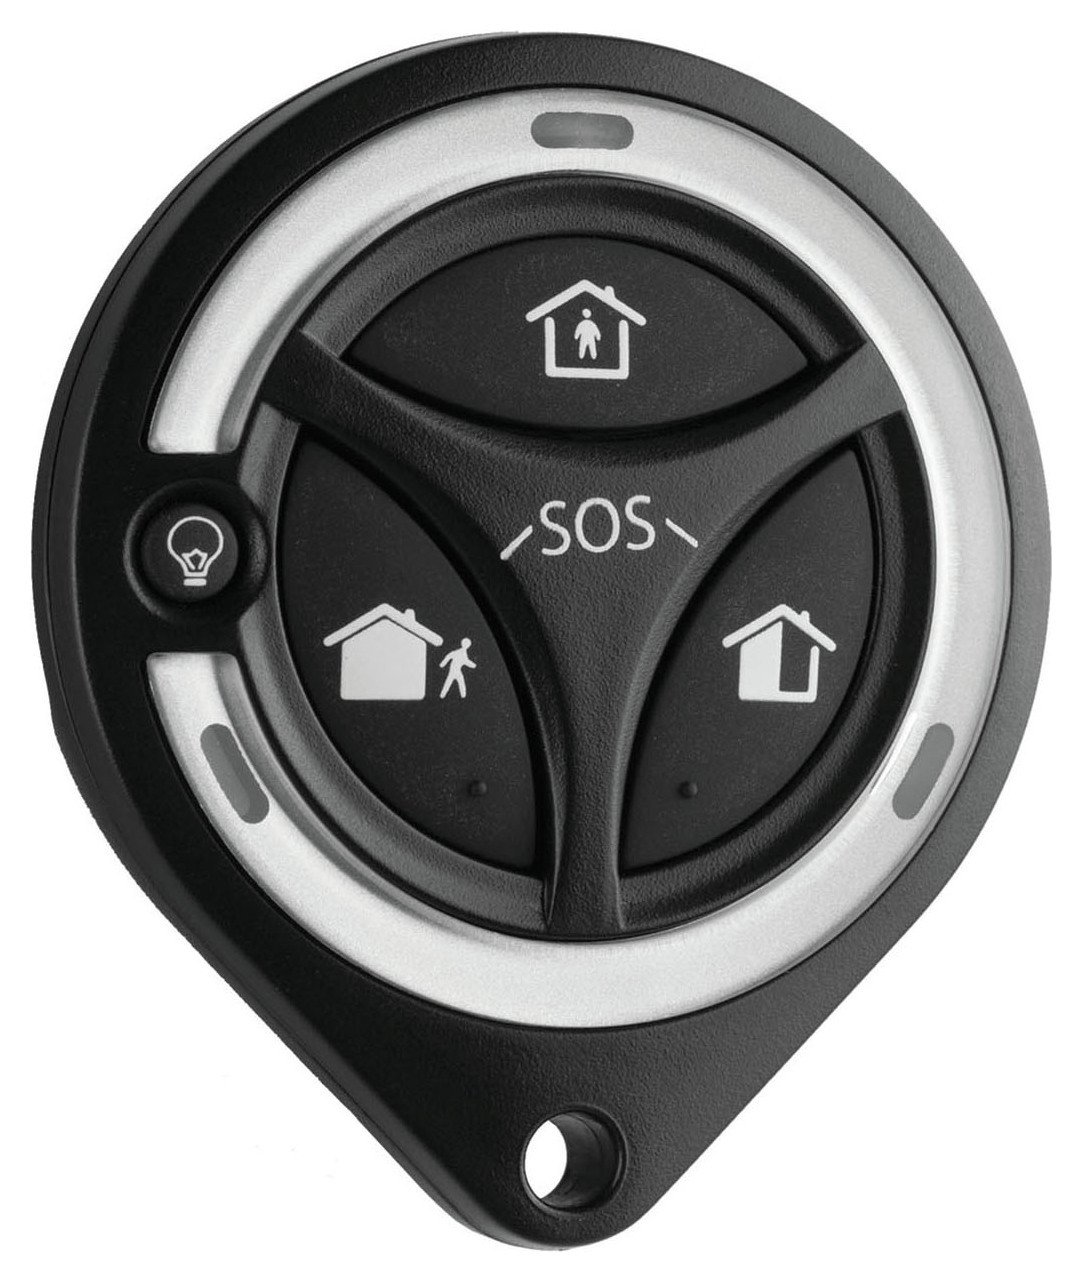 Honeywell Evohome Security Remote Control Wireless Fob